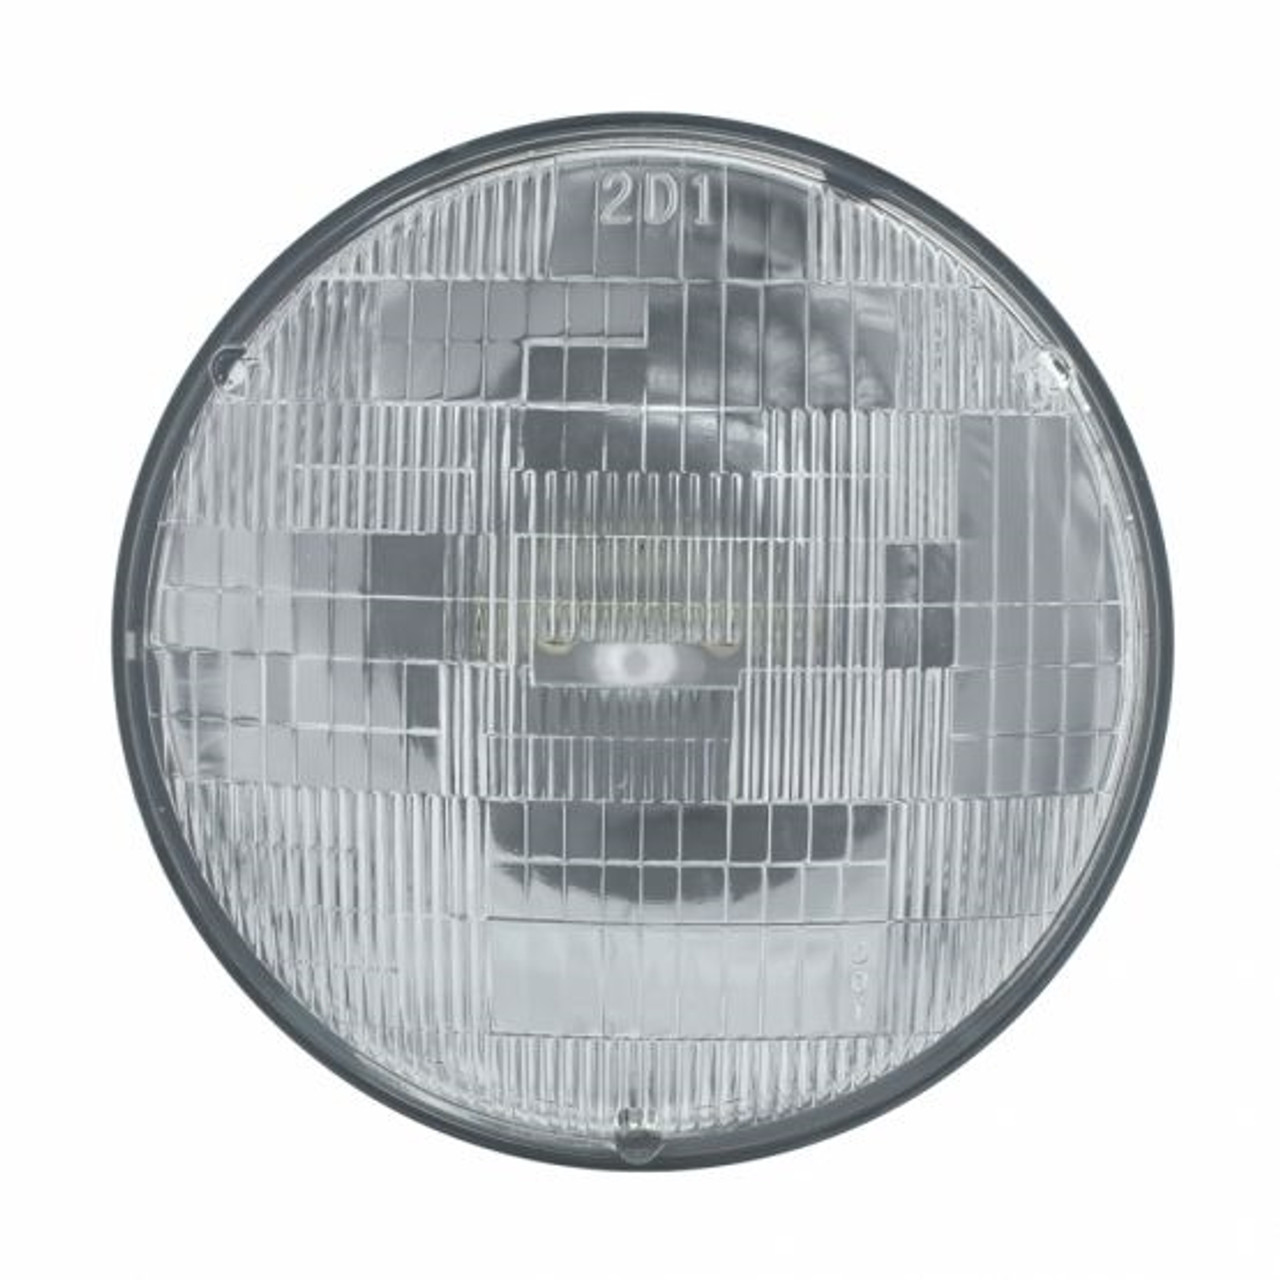 7"  Halogen Headlamp, High and Low Beam 12 volts - 30356